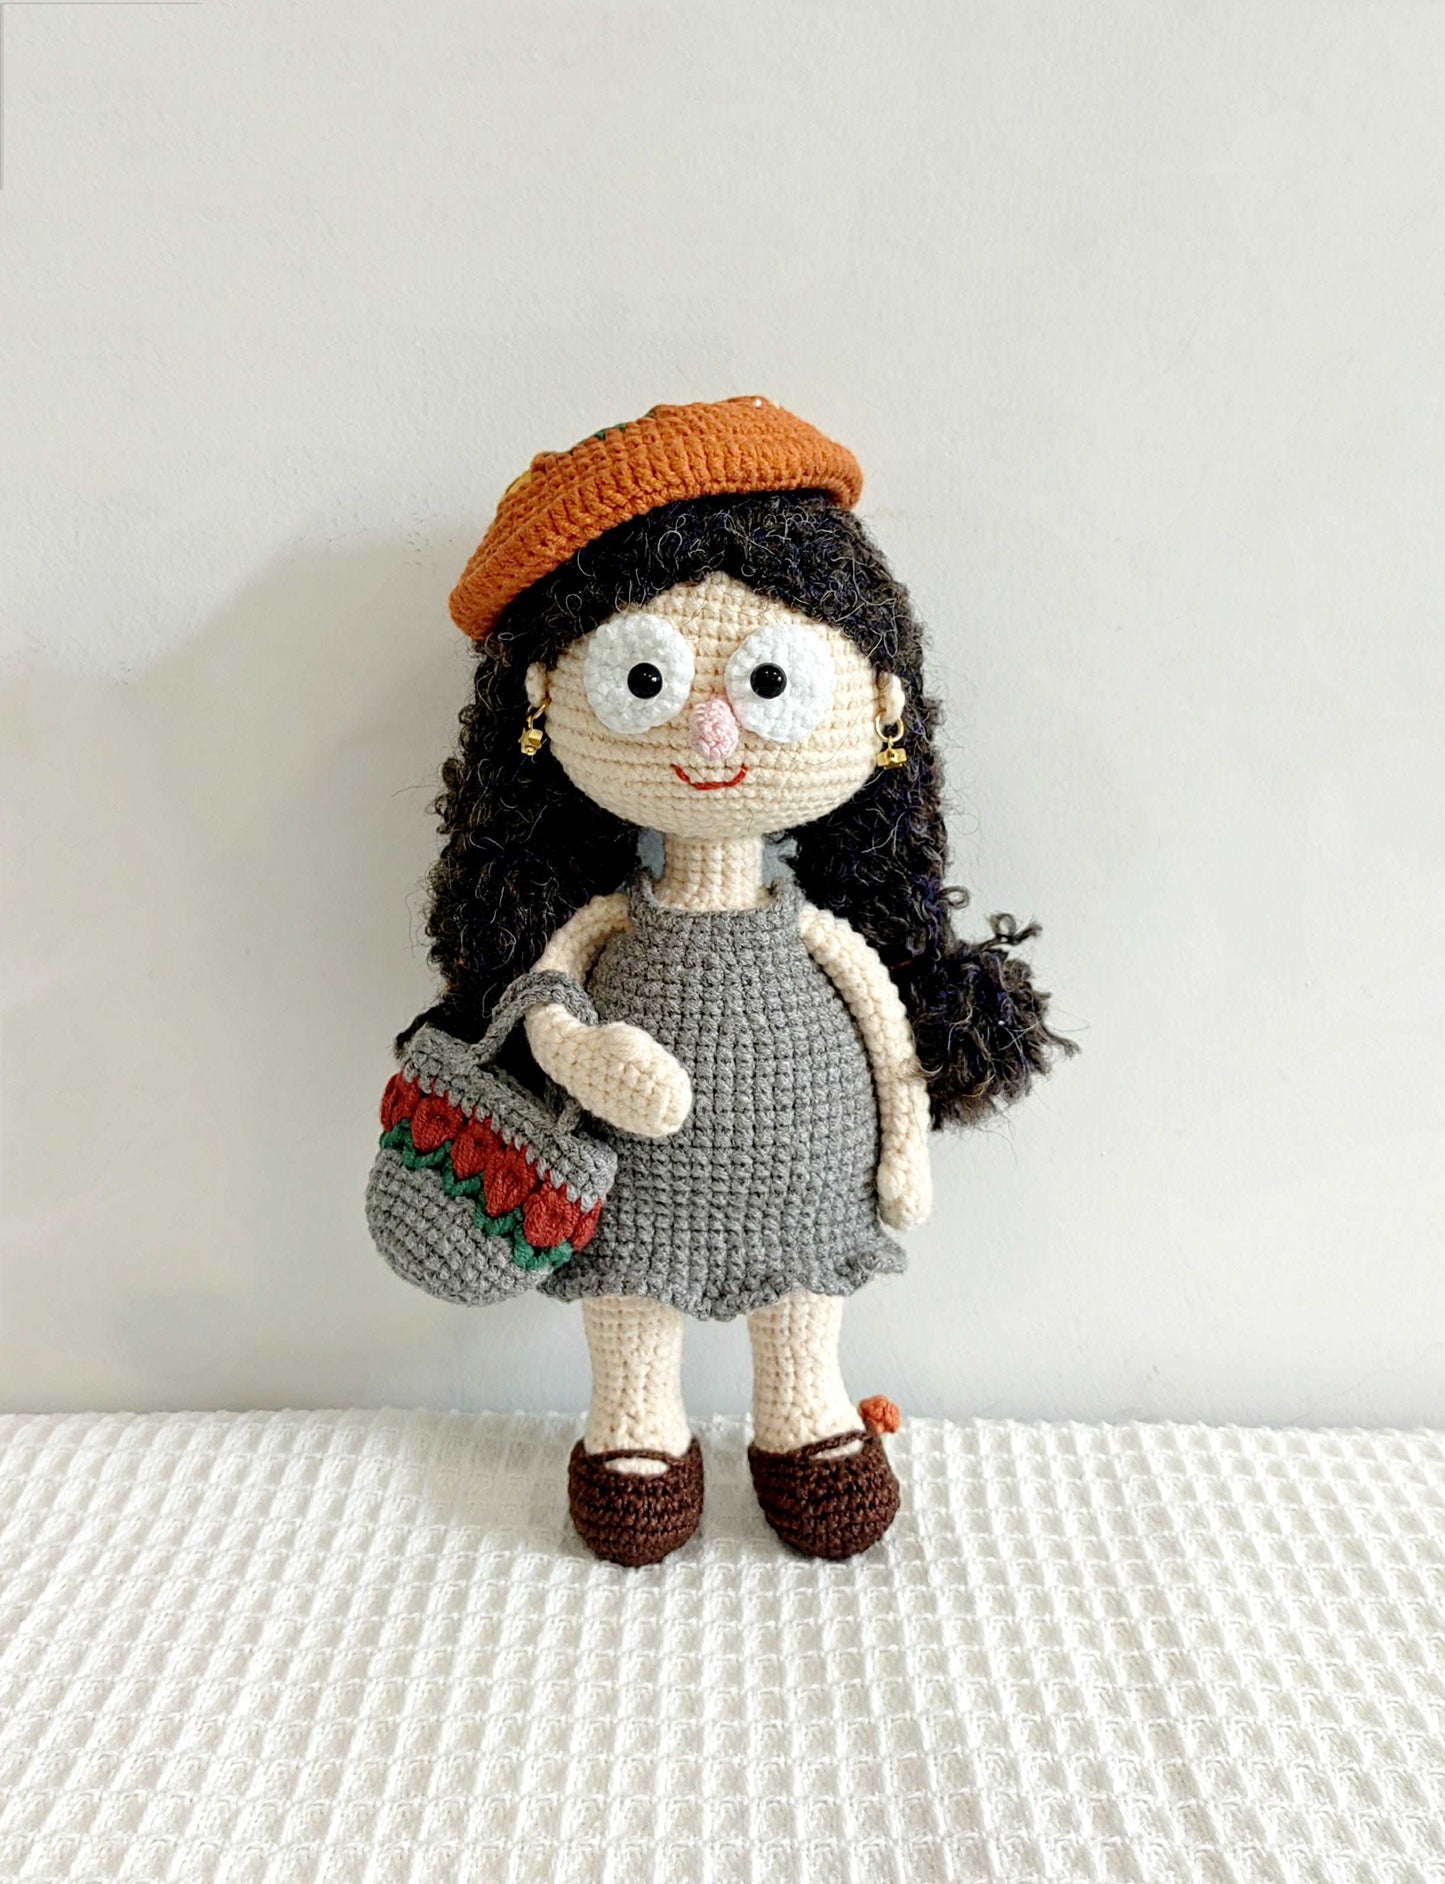 Personalized Crocheted Character Doll Figurine for Home Accentuating